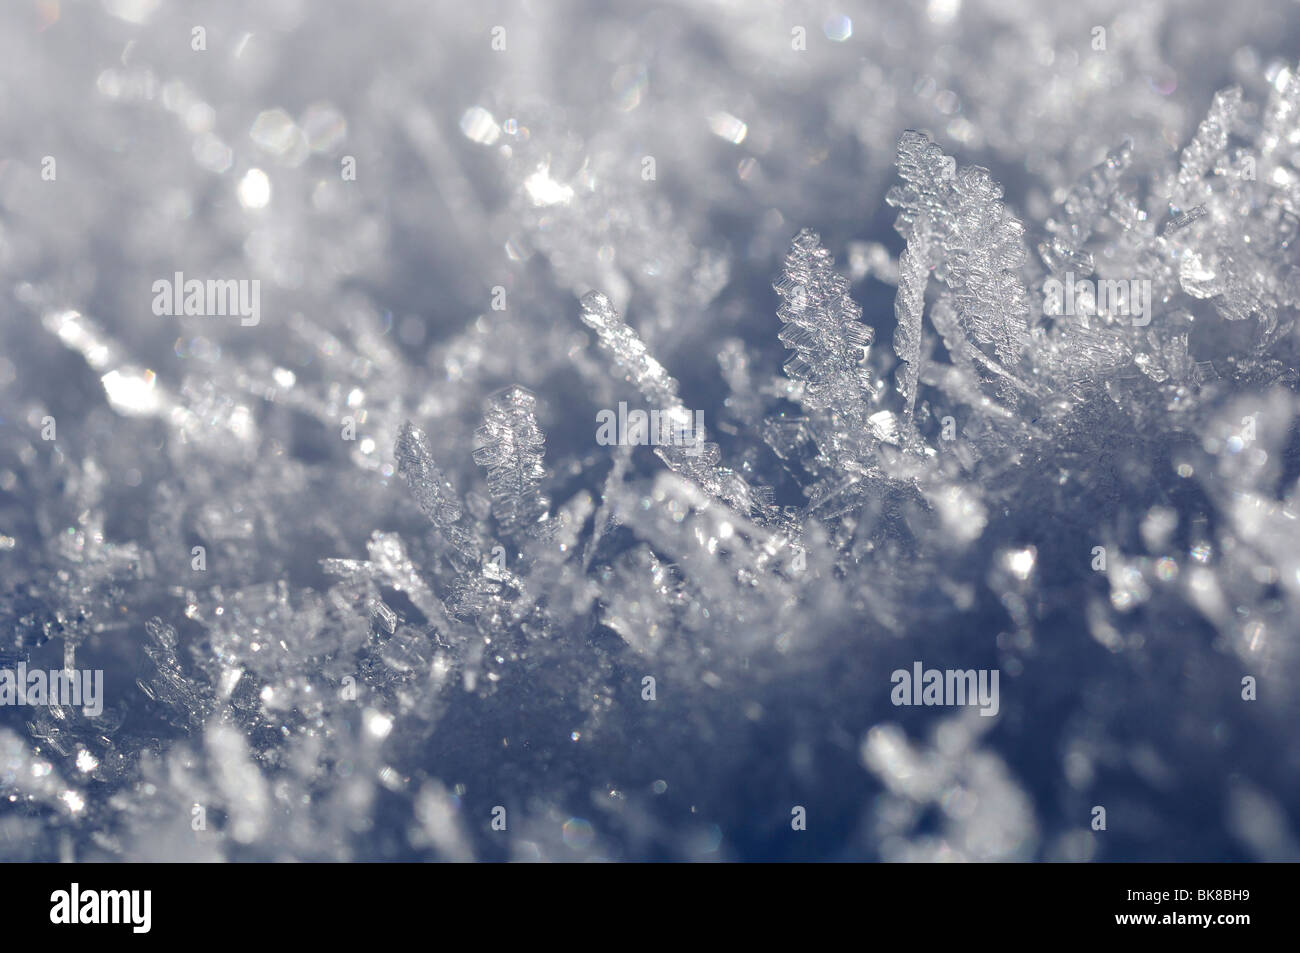 Snow, ice crystals, detail, close-up Stock Photo